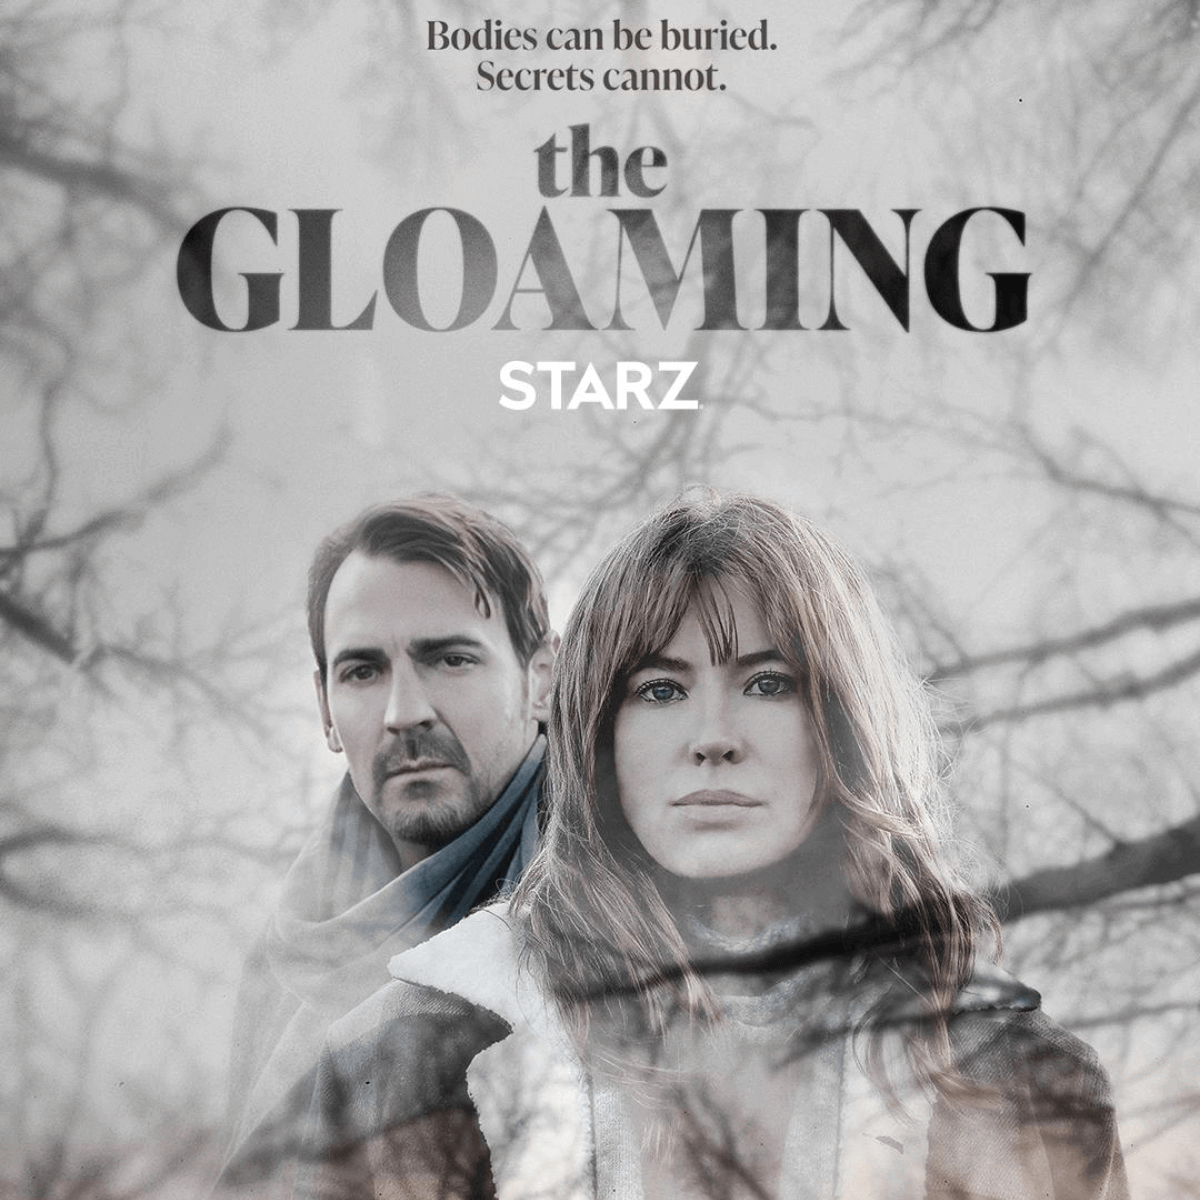 The Gloaming on Starz background